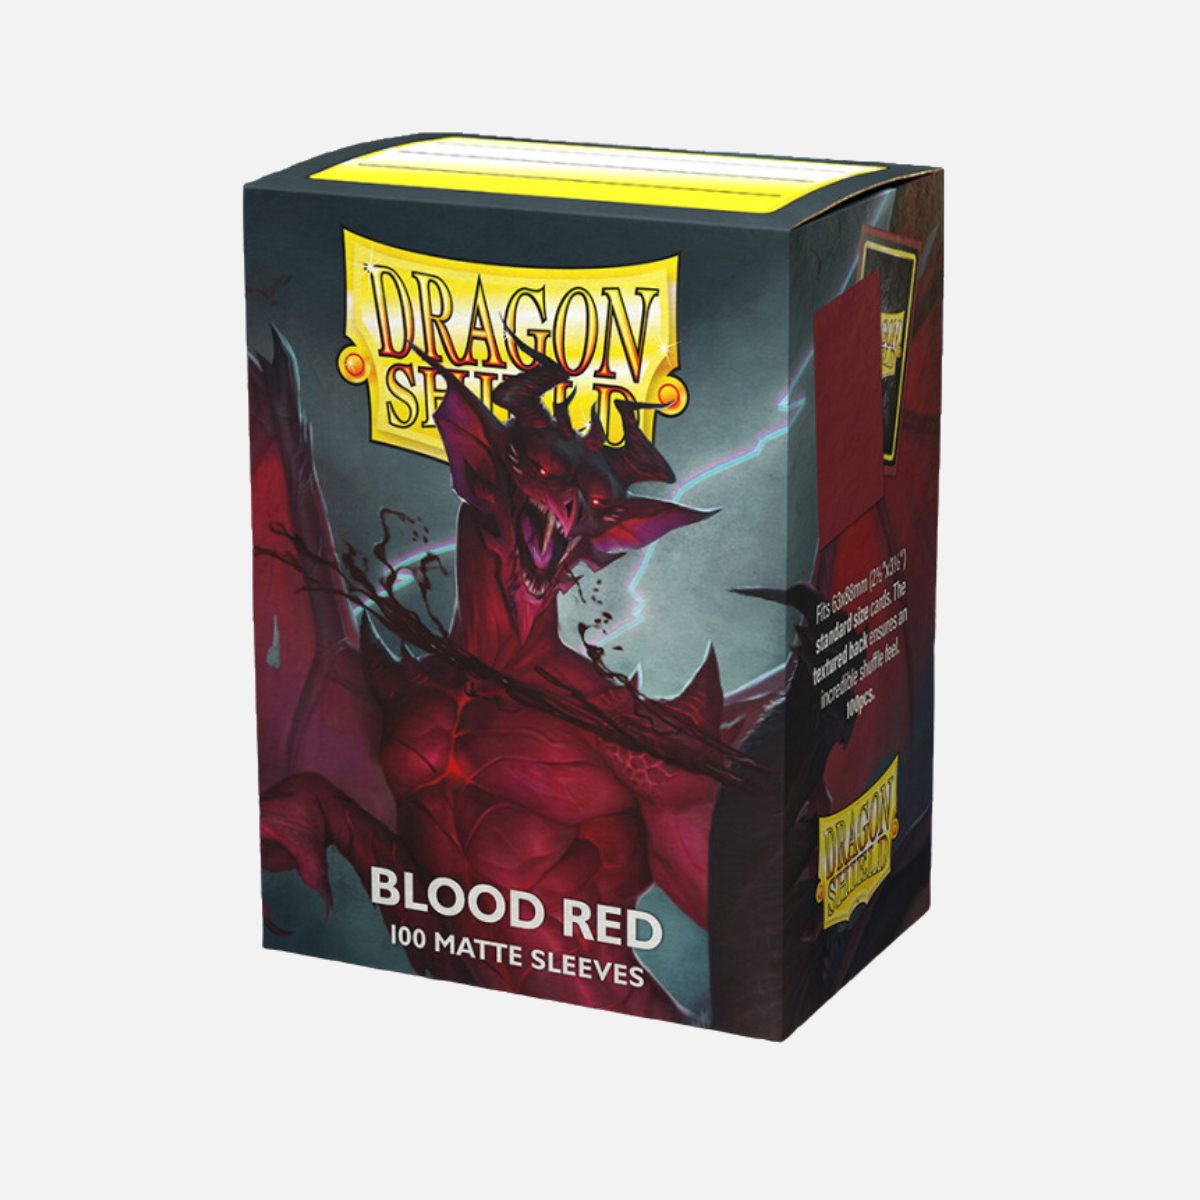 Dragon Shield card sleeves box of 100 blood red matte